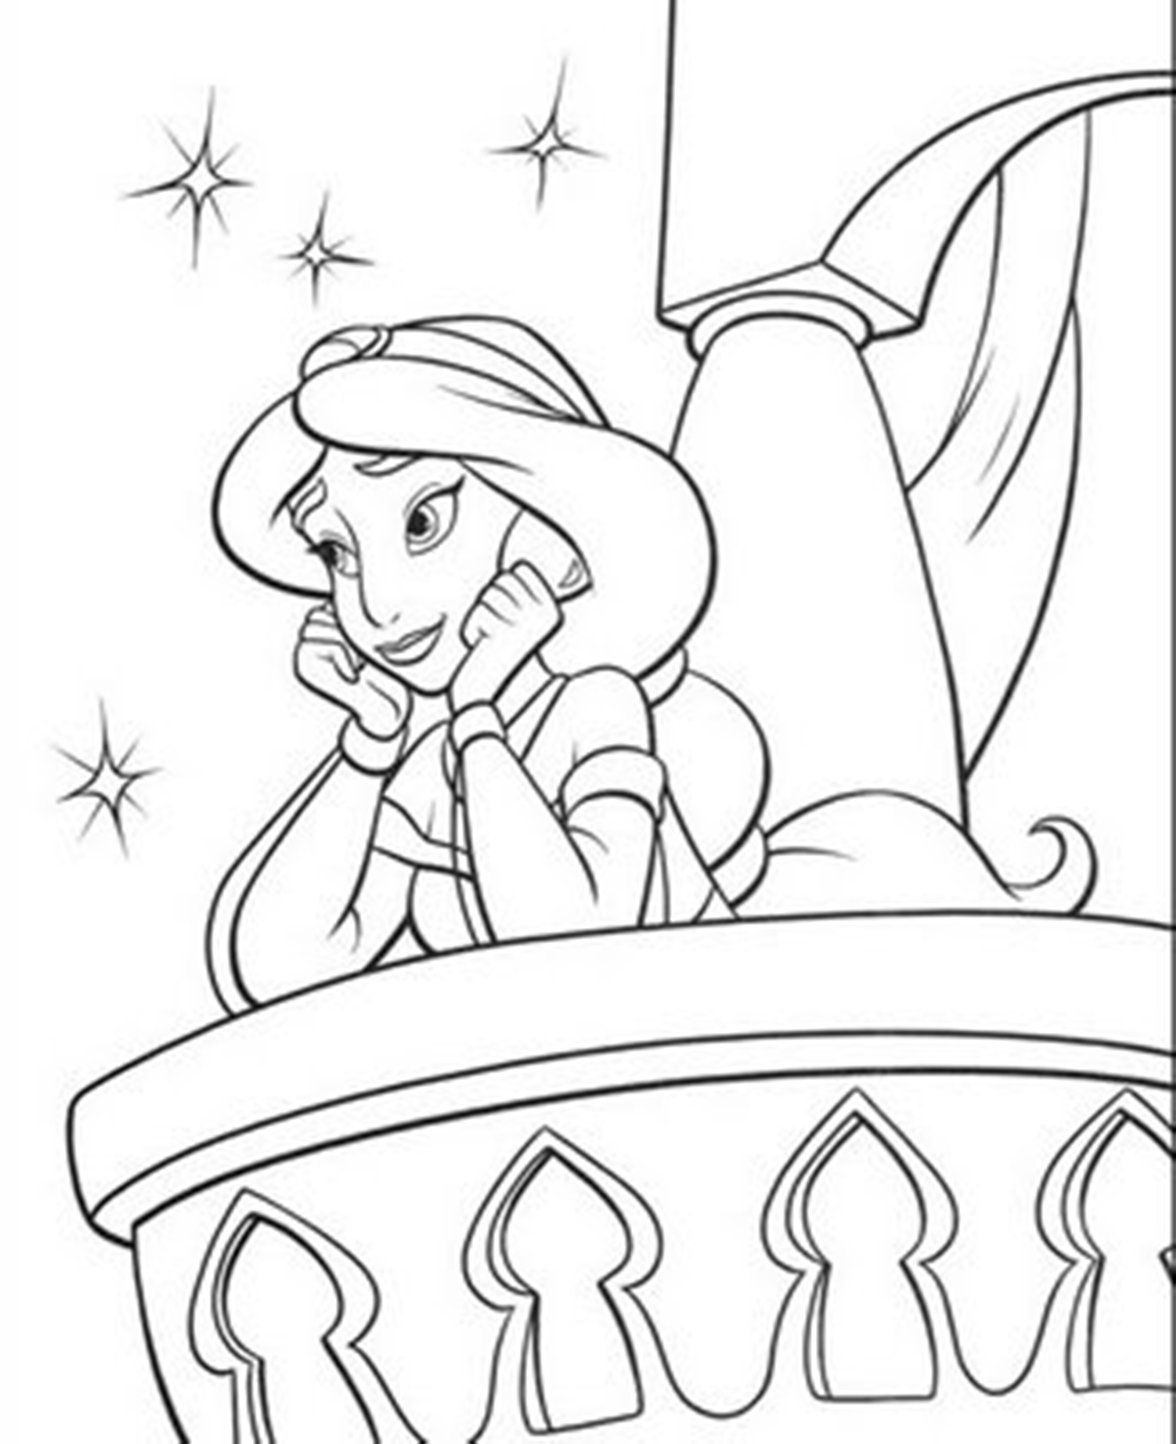 Aladdin Coloring Pages - Koloringpages